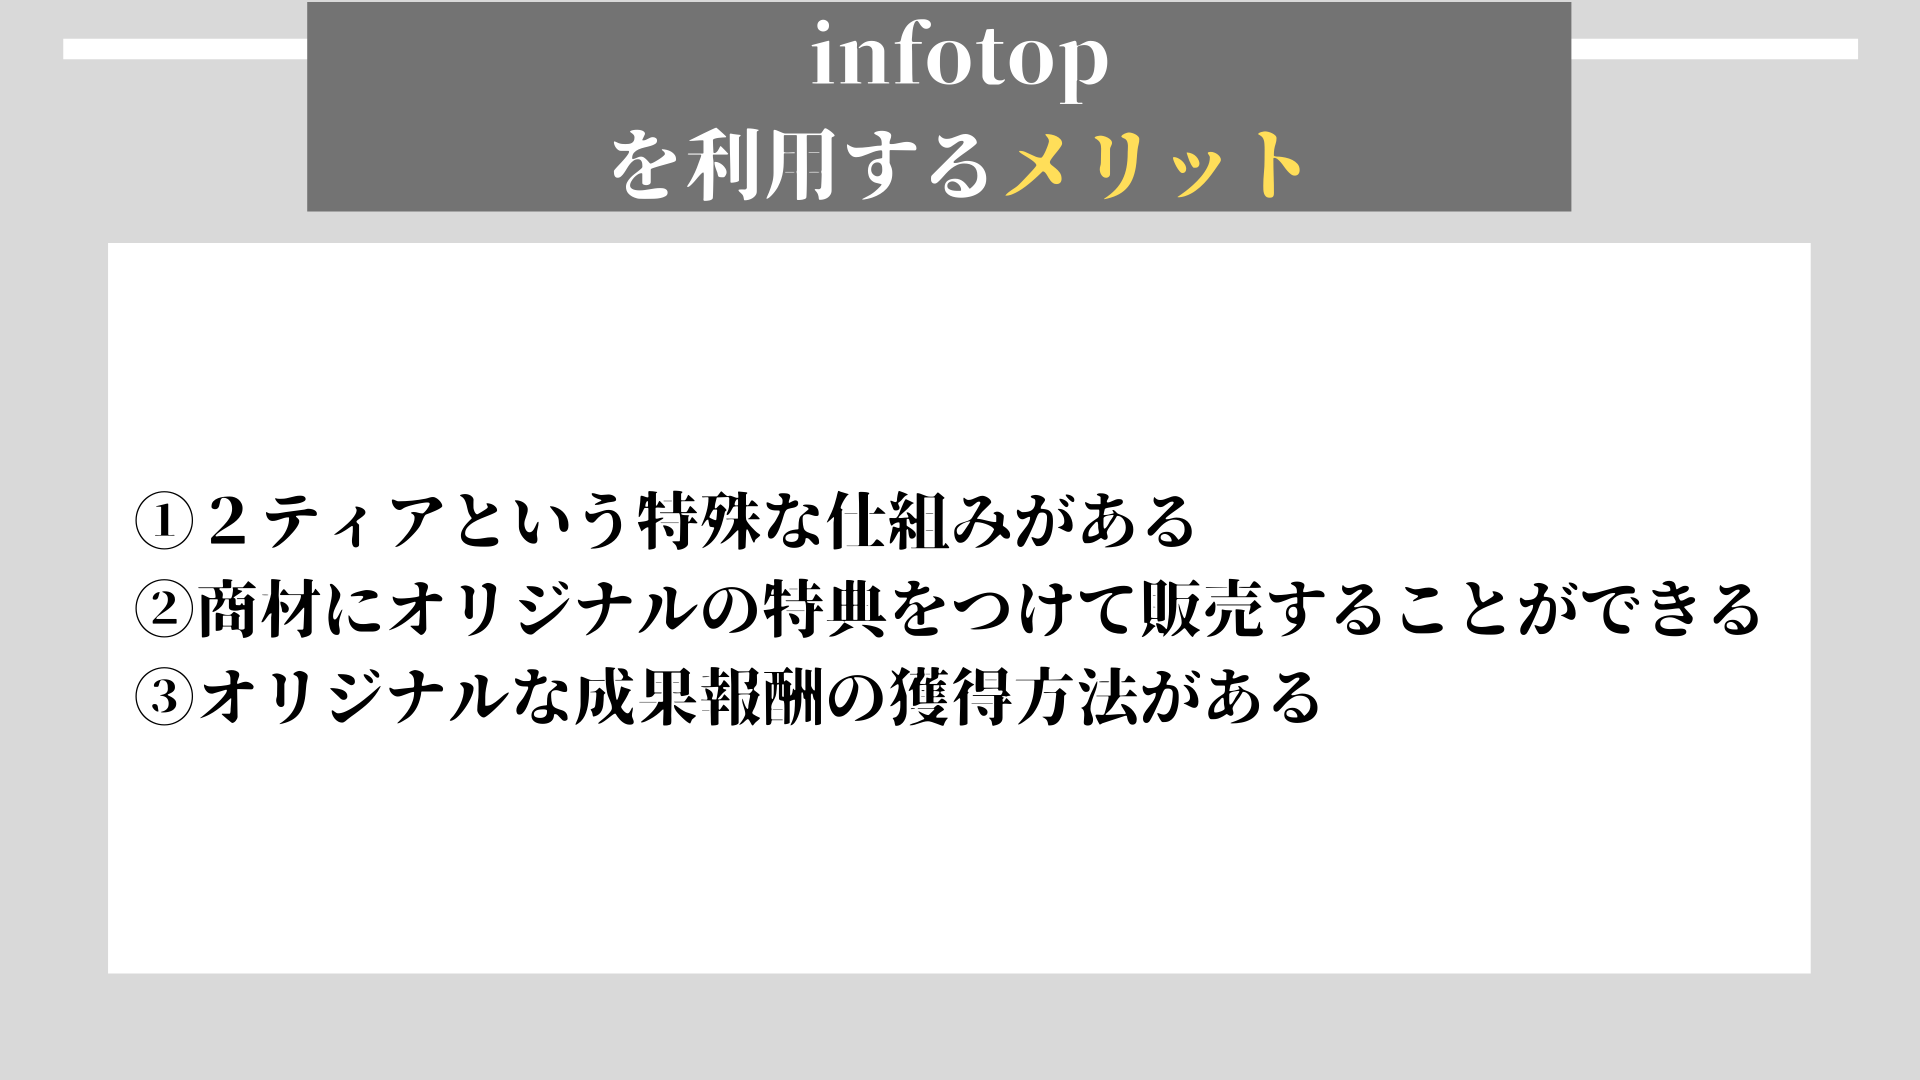 infotop　メリット